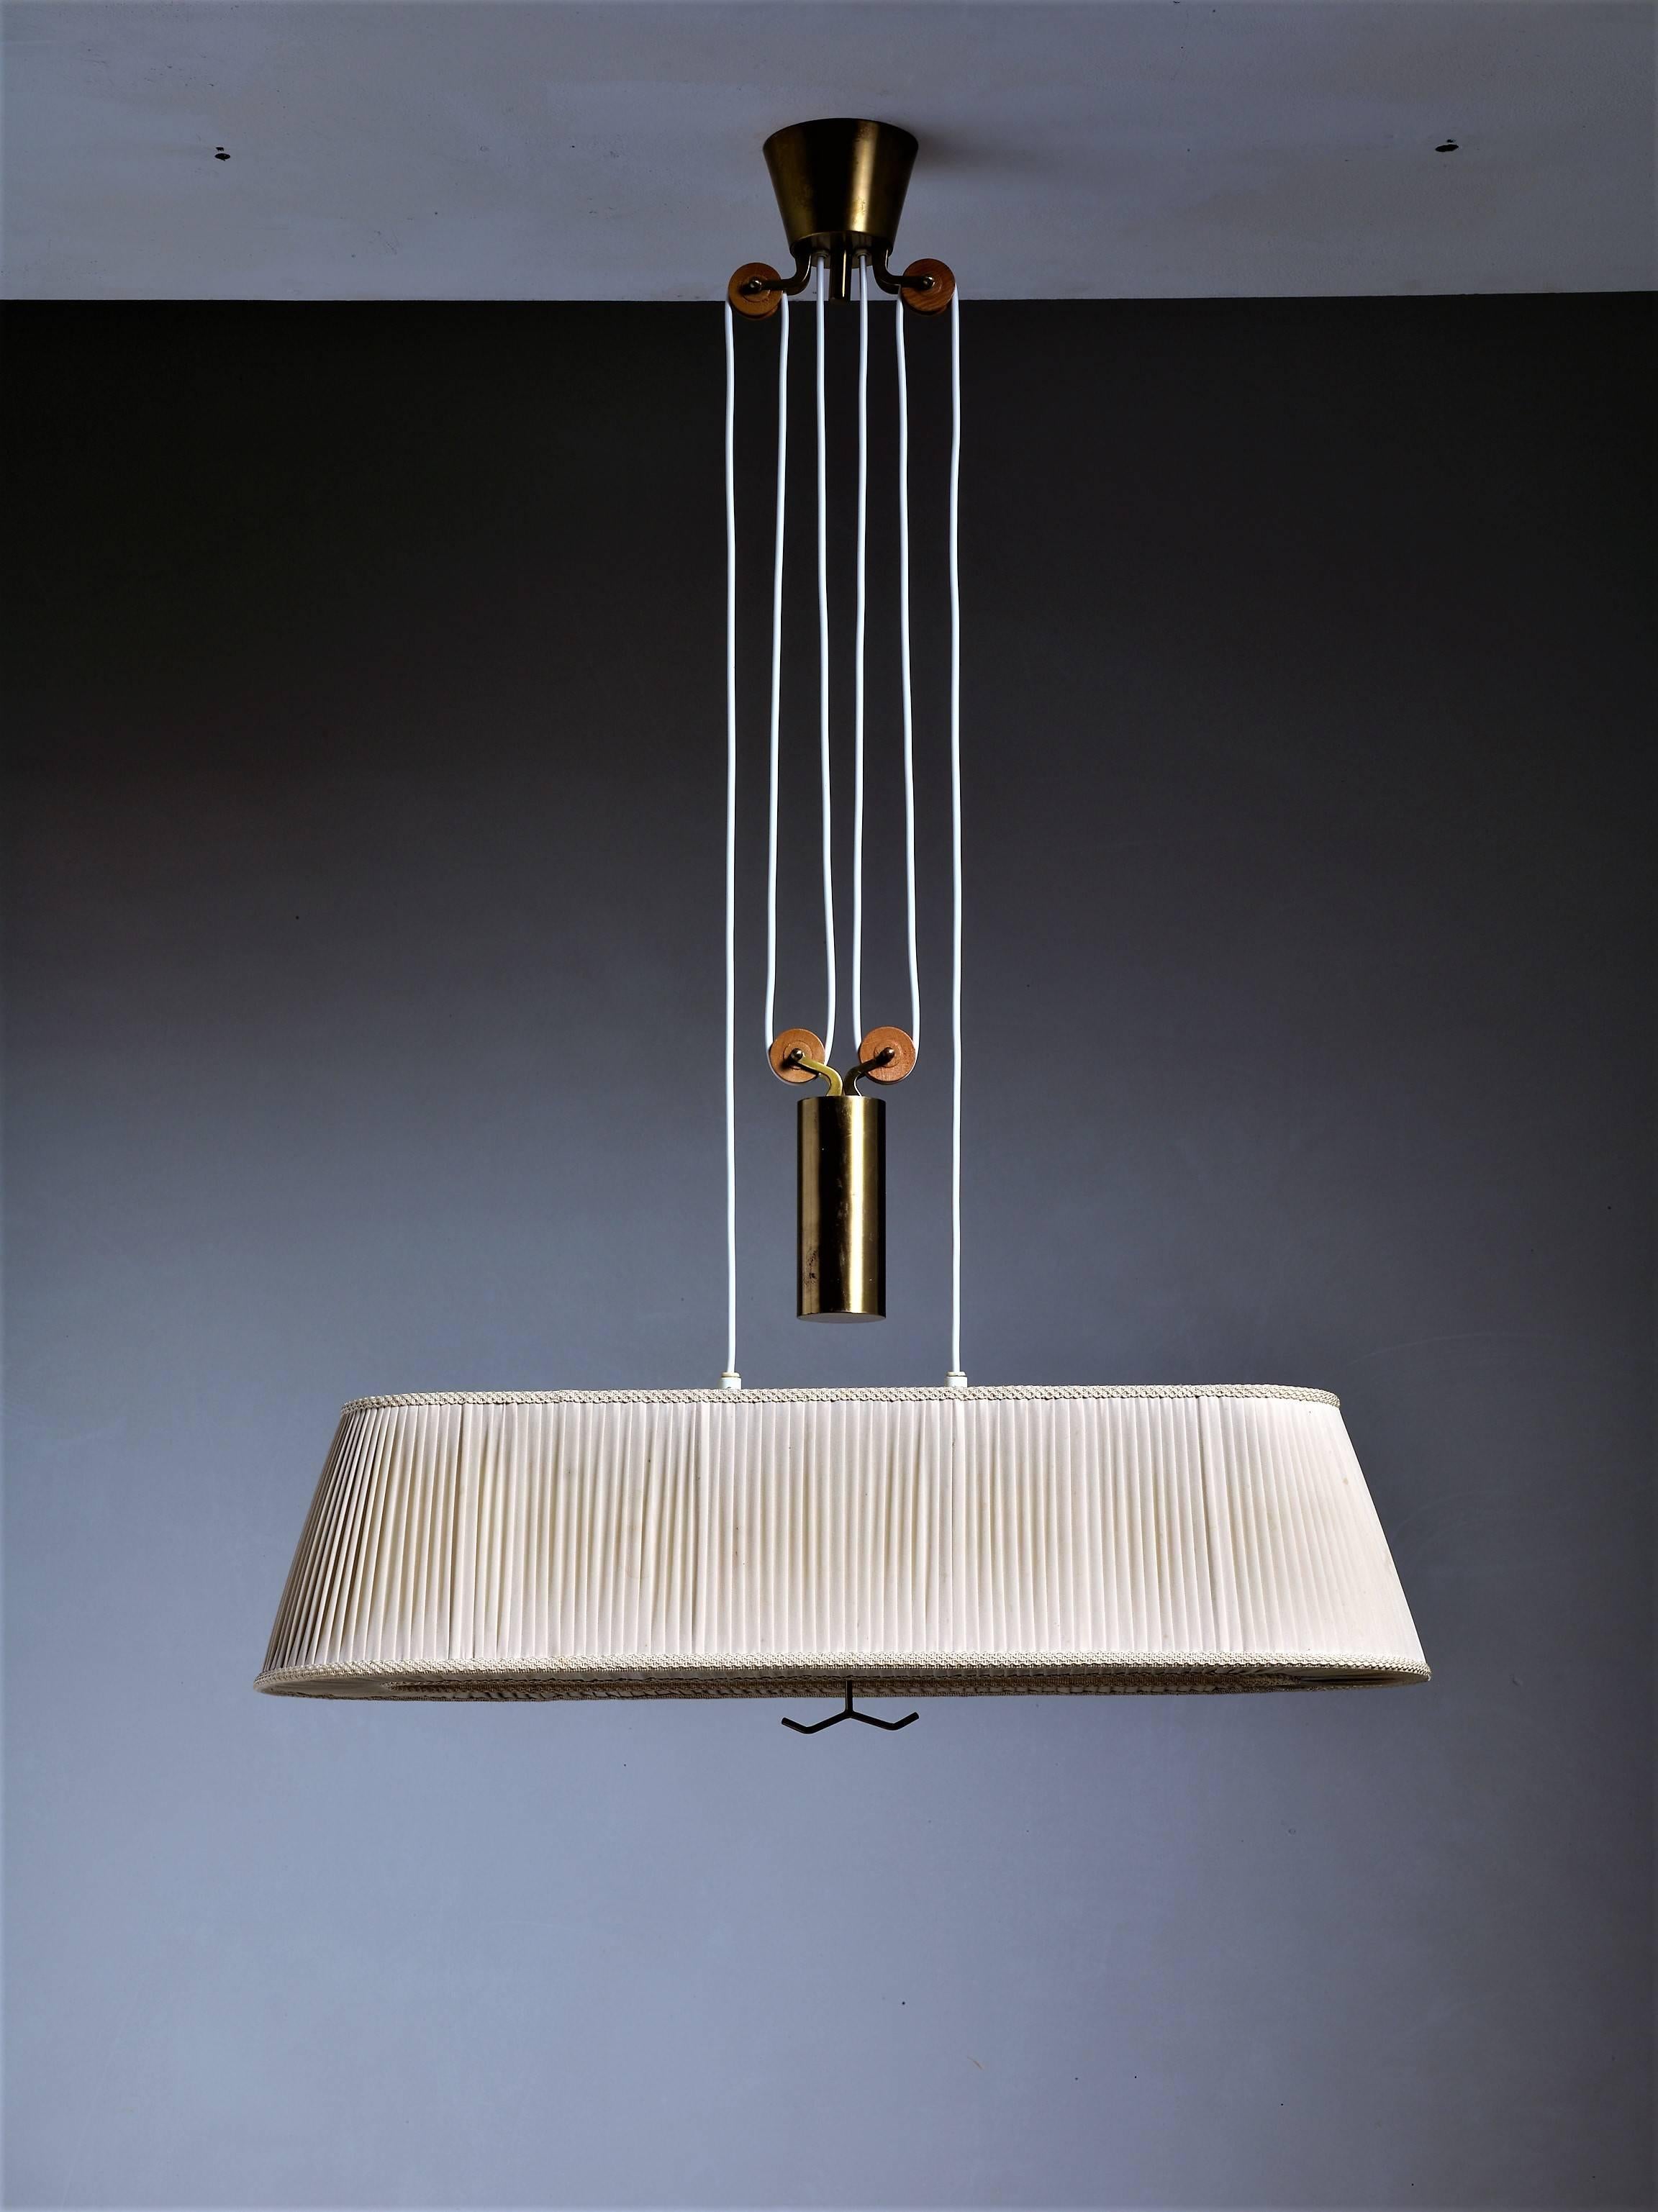 A rectangular, height-adjustable Swedish pendant with a heavy brass counter weight. The lamp has a pleated fabric shade and two E27 light bulbs.
The style is reminiscent of Lisa Johansson-Pape.

* This piece is offered to you by Bloomberry,